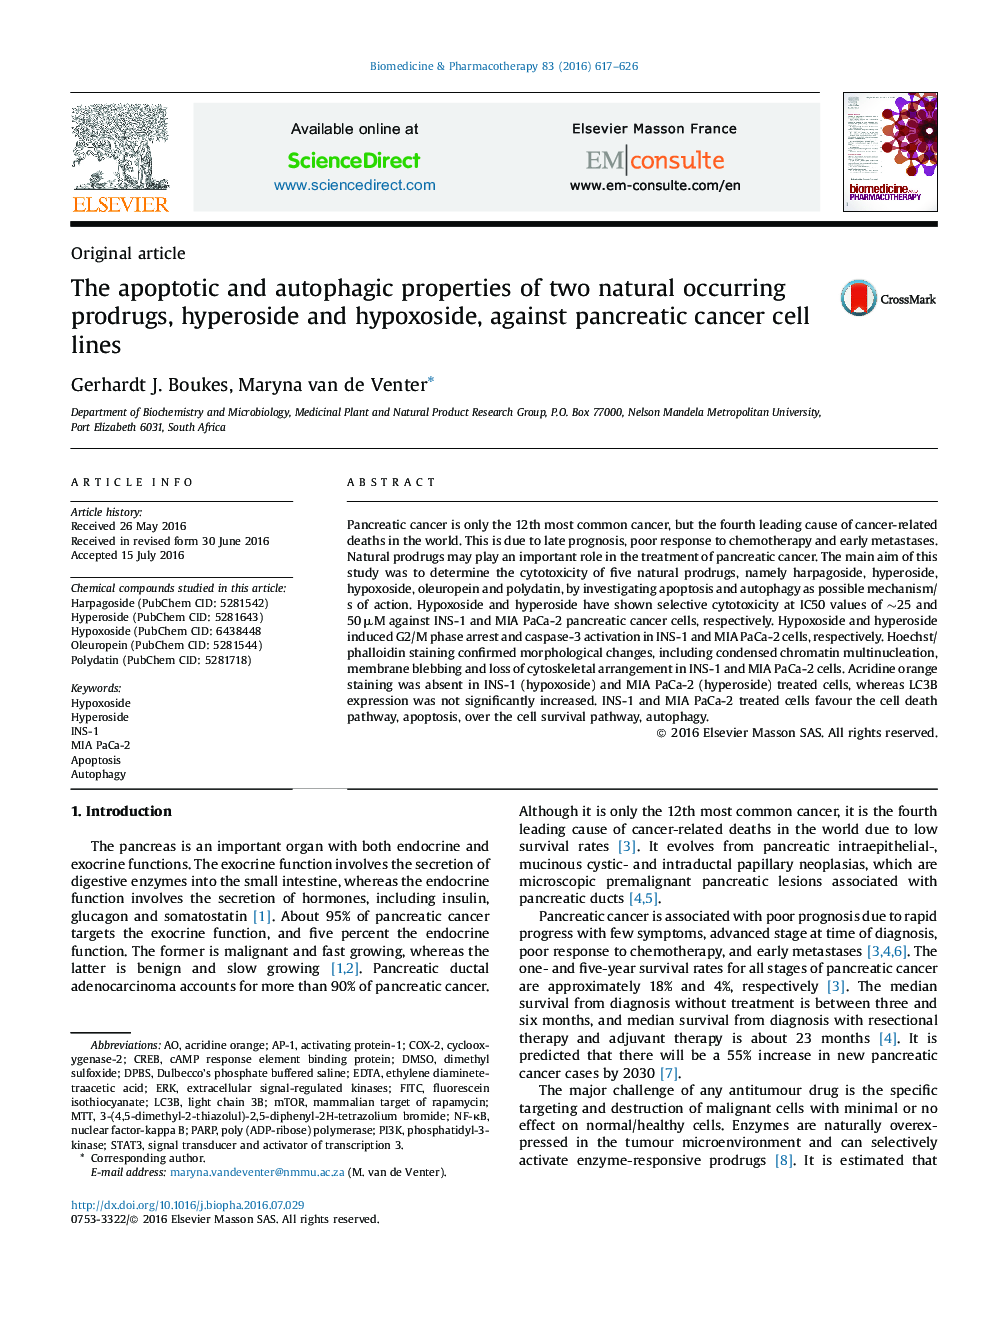 The apoptotic and autophagic properties of two natural occurring prodrugs, hyperoside and hypoxoside, against pancreatic cancer cell lines